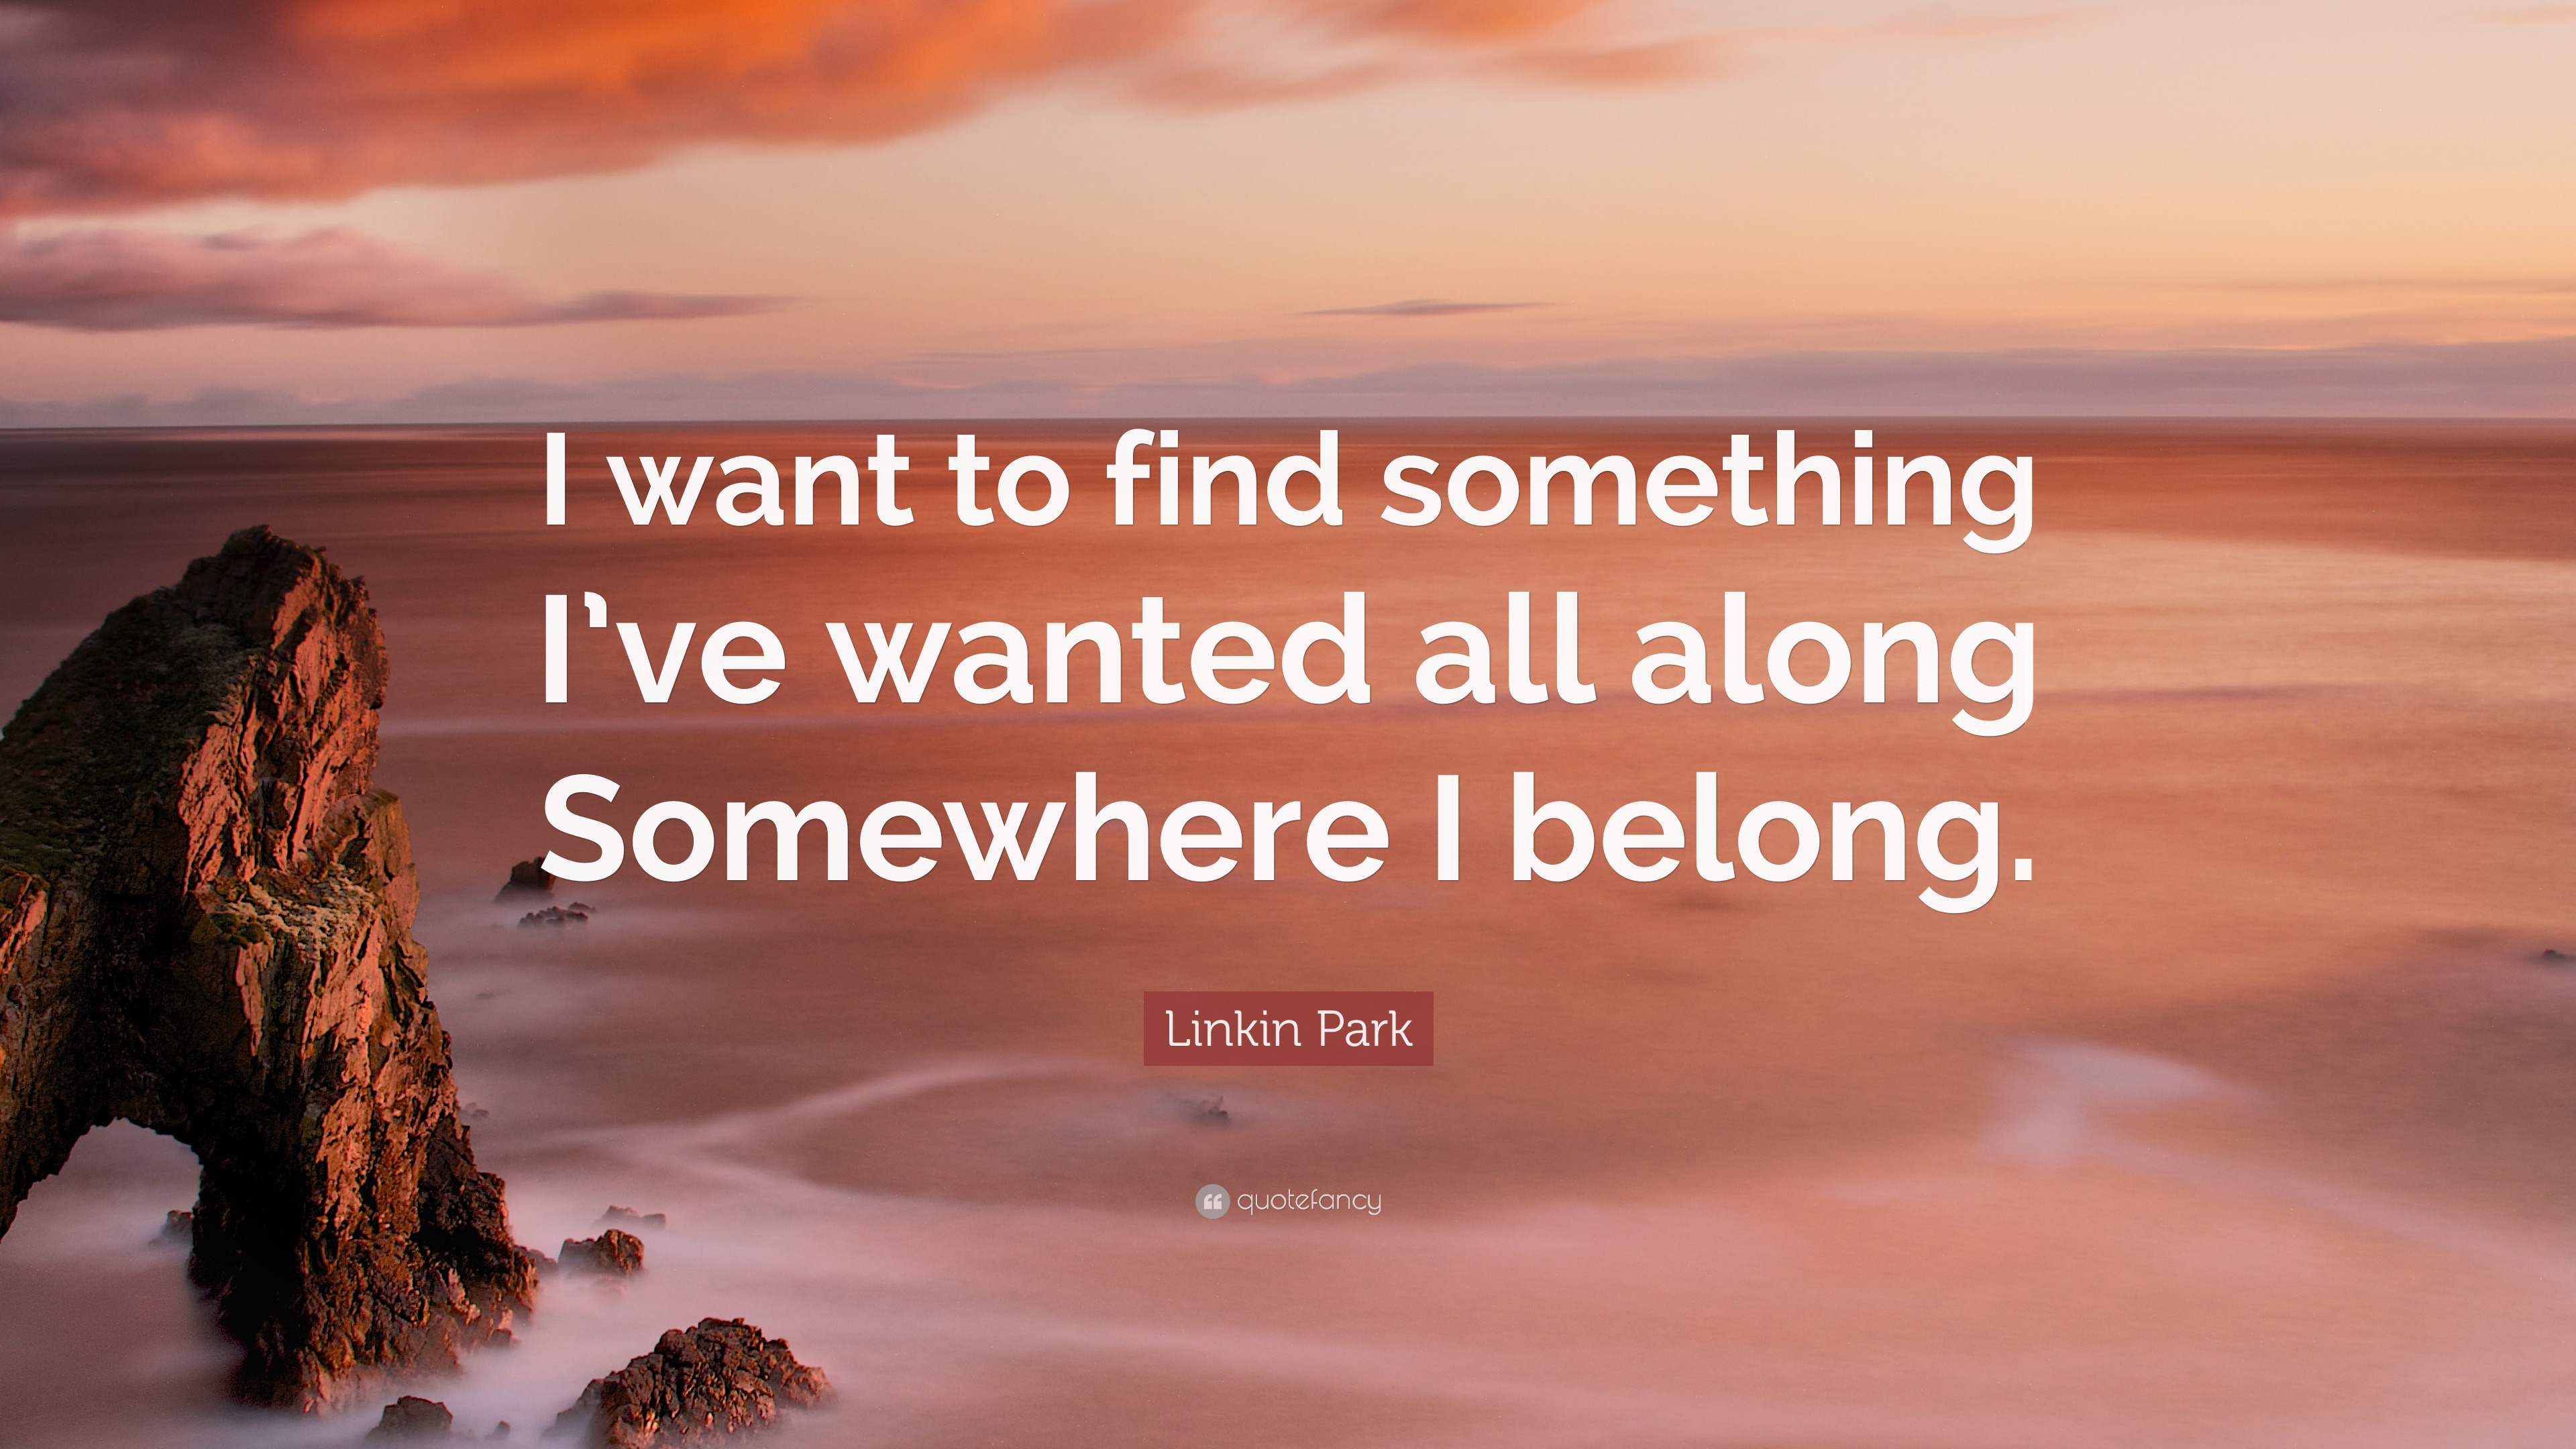 Finding Somewhere to Belong by C.C. Masters